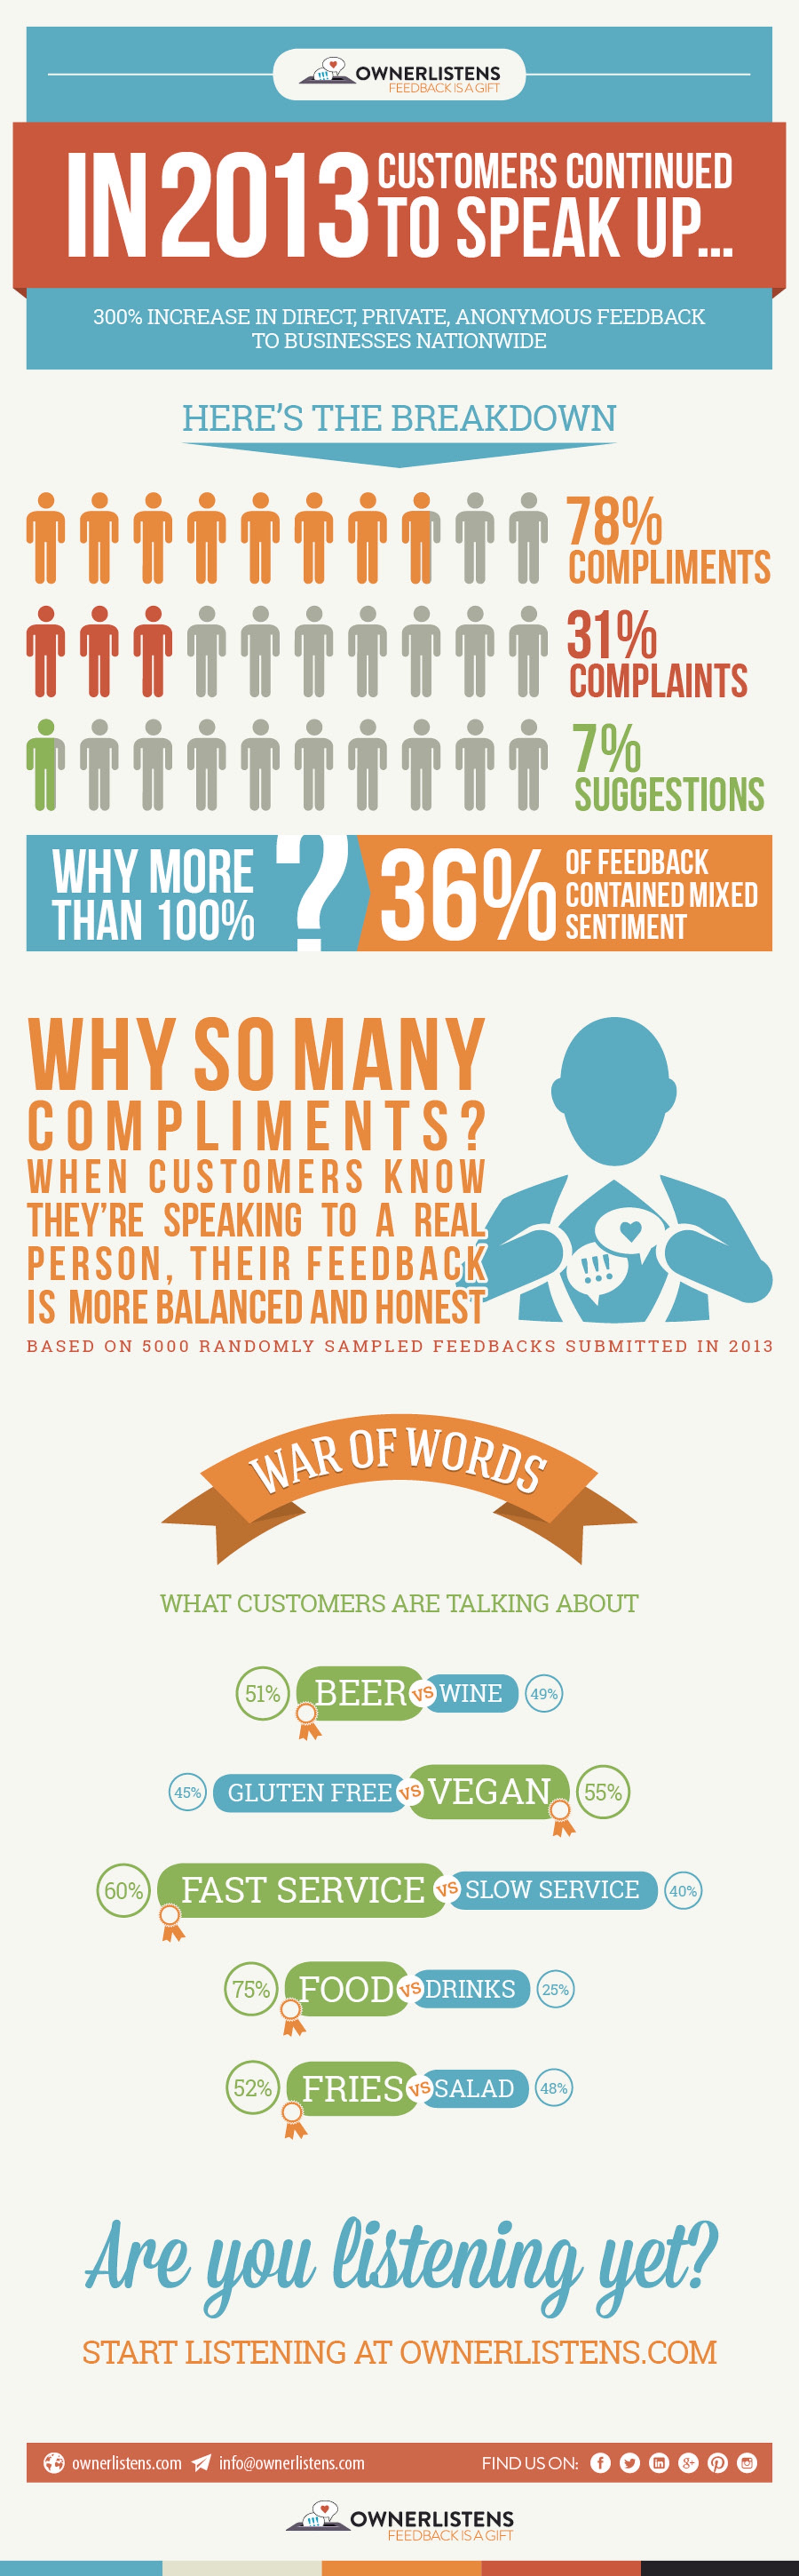 In 2013 Customers Continued to Speak Up